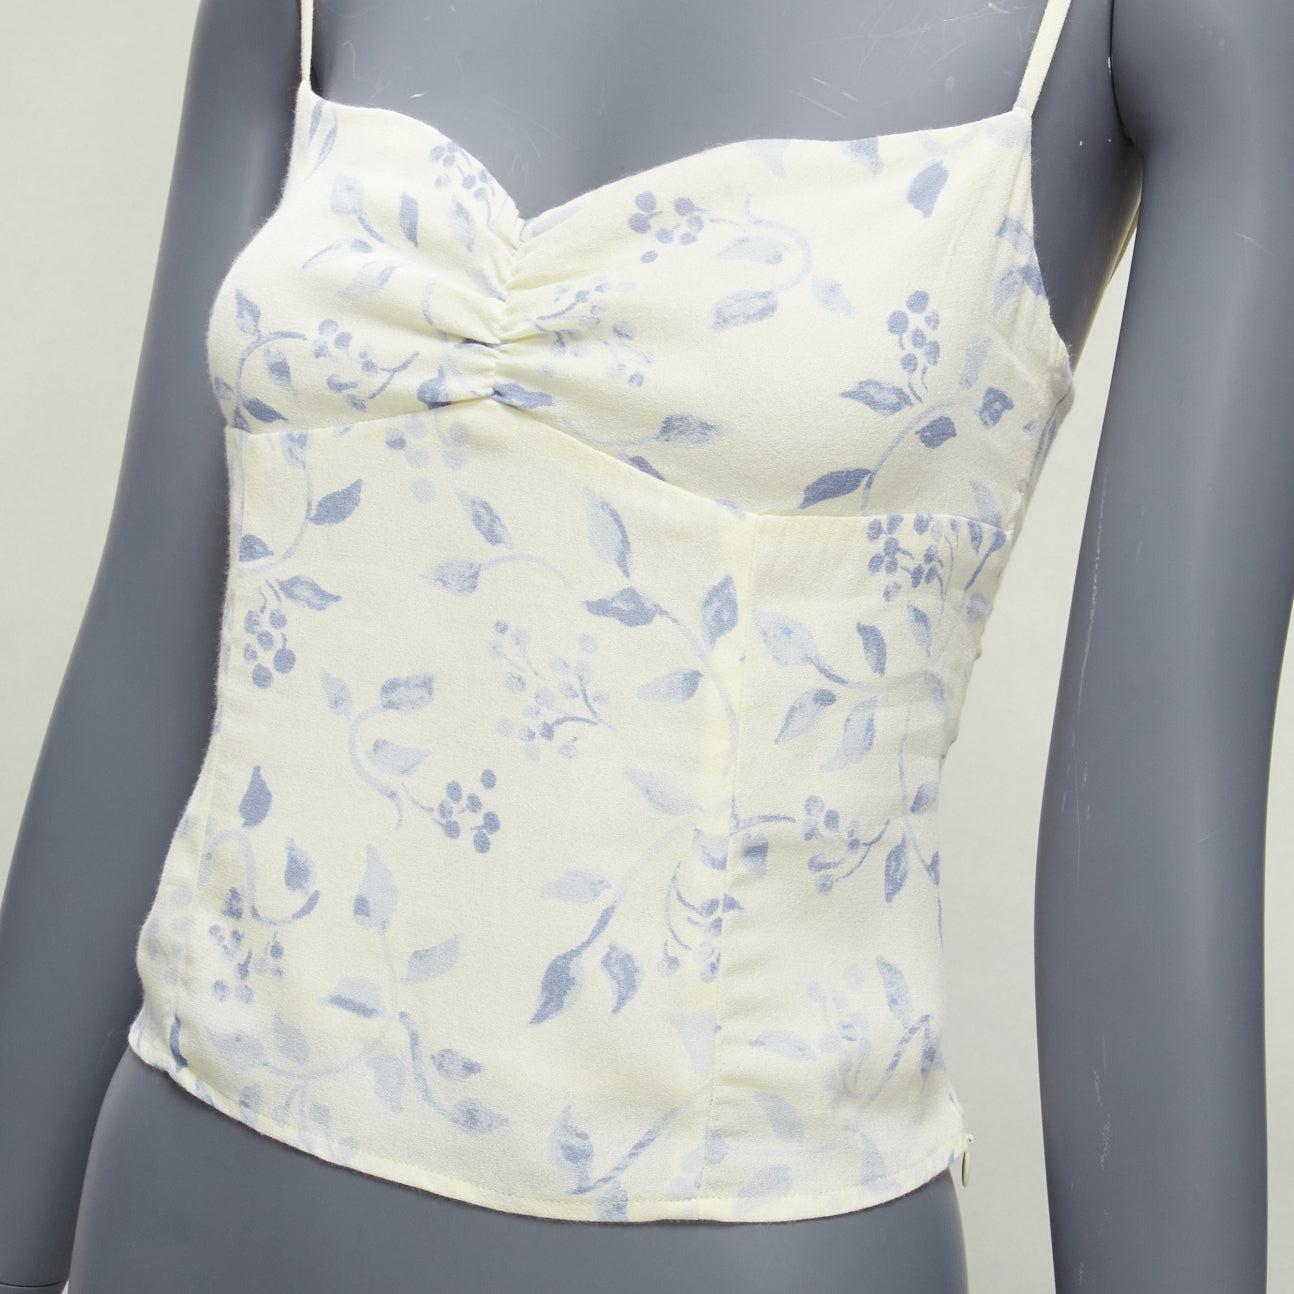 REFORMATION cream blue floral print retro ruched tank top US2 S
Reference: SNKO/A00395
Brand: Reformation
Material: Viscose
Color: Cream, Blue
Pattern: Floral
Closure: Elasticated
Lining: Cream Fabric
Extra Details: Elasticated back.
Made in: United